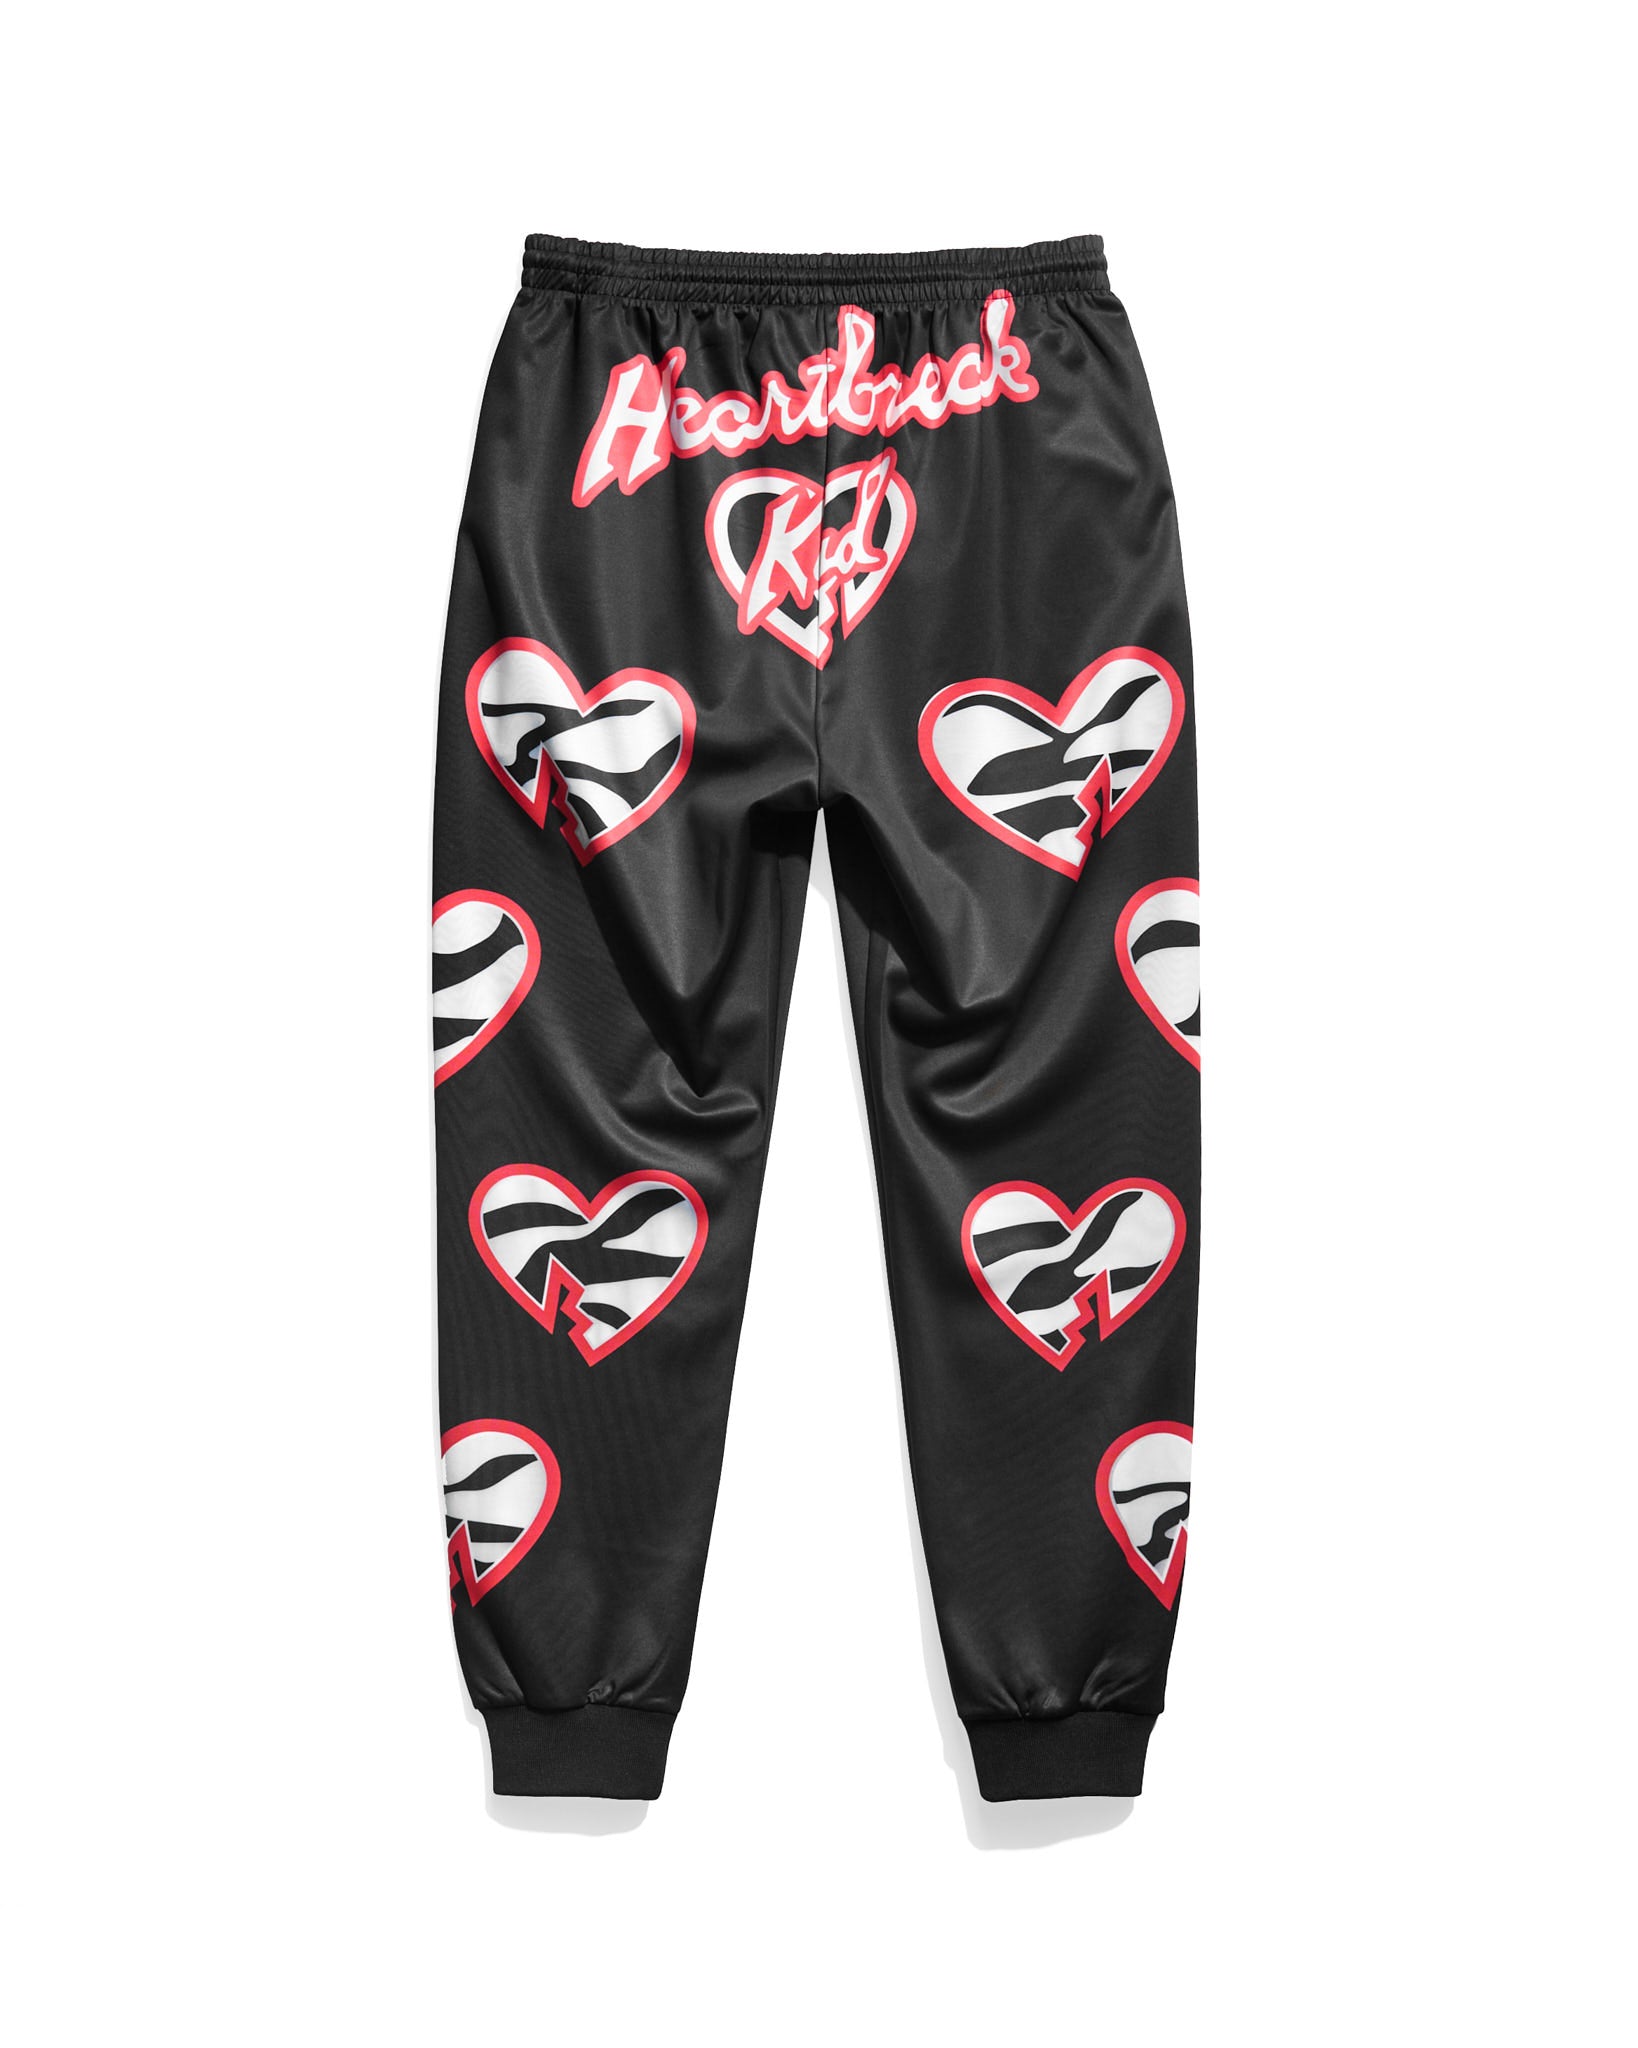 Shawn Michaels HBK In Your House 10 Mind Games Entrance Pants